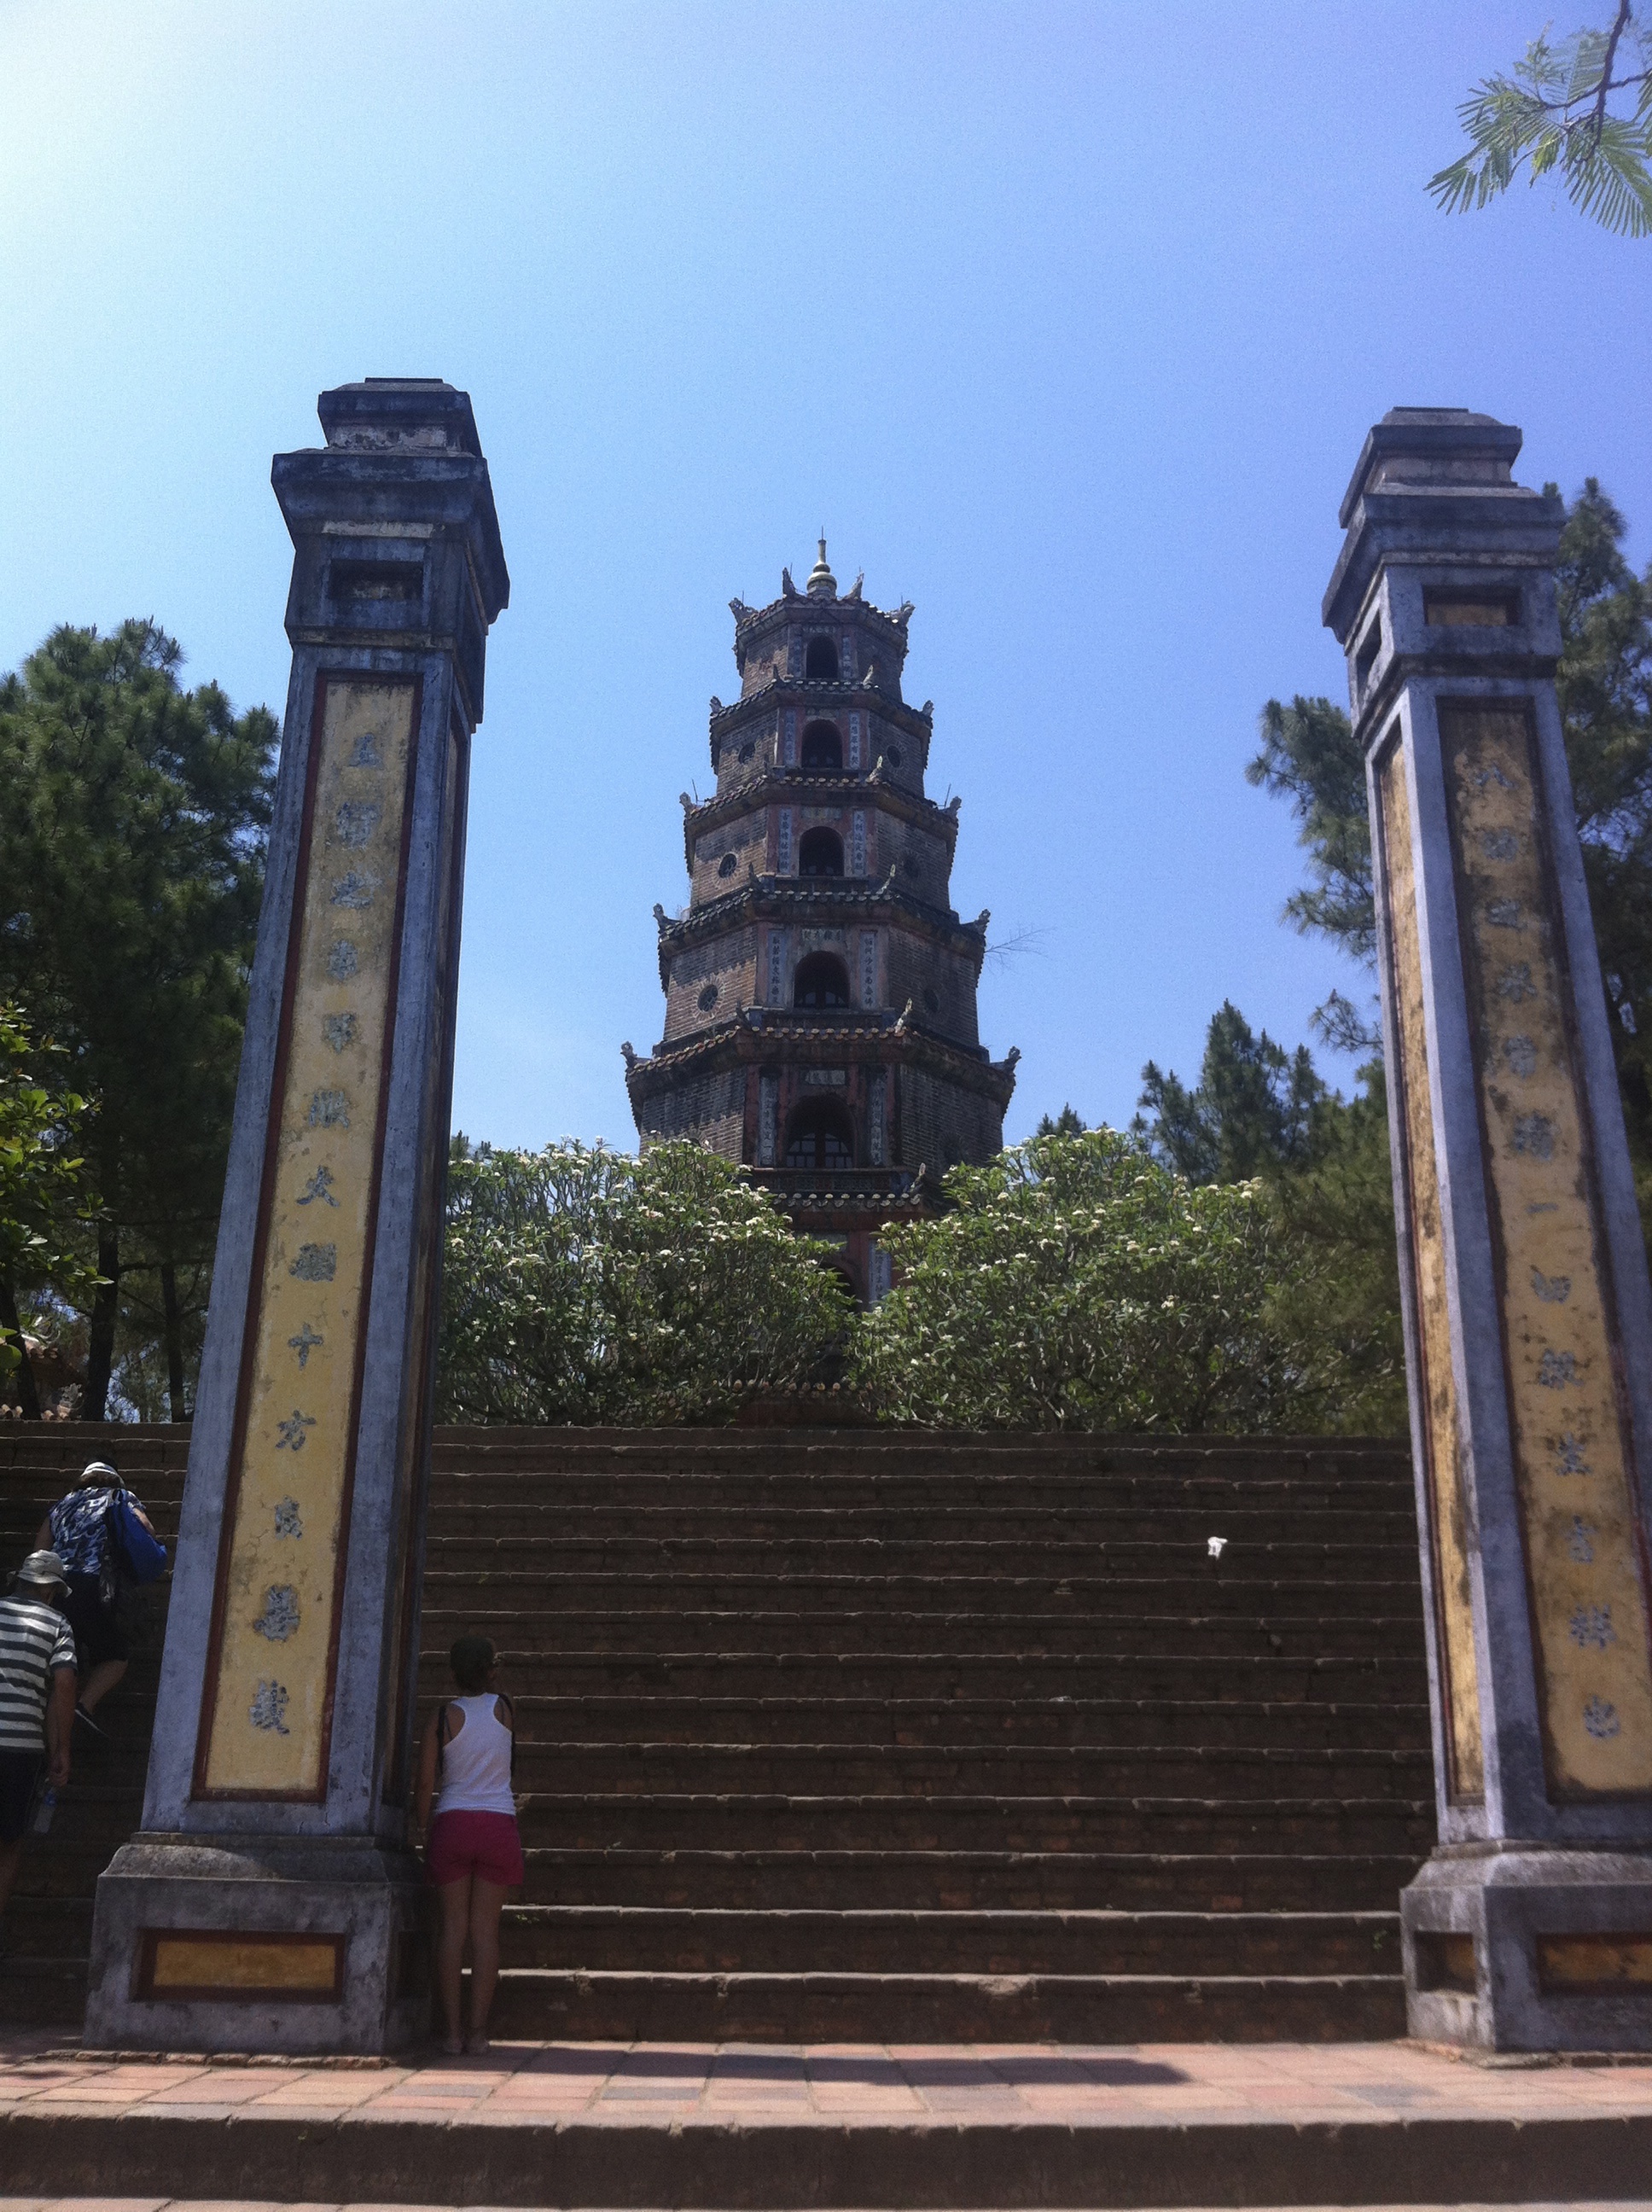 Hue – The Citadel and the Perfume River